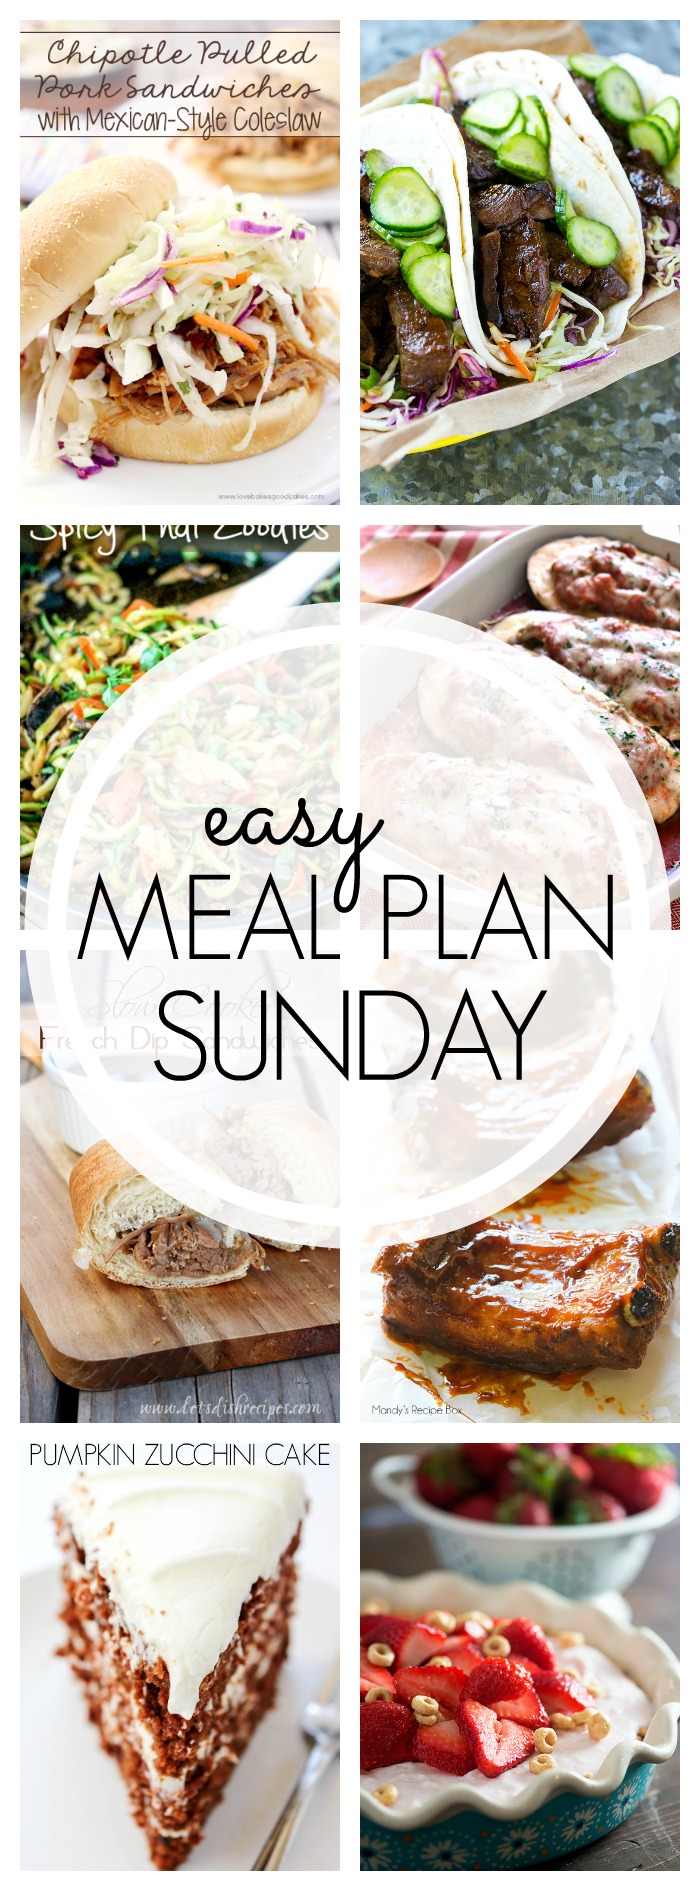 Easy Meal Plan Sunday #62